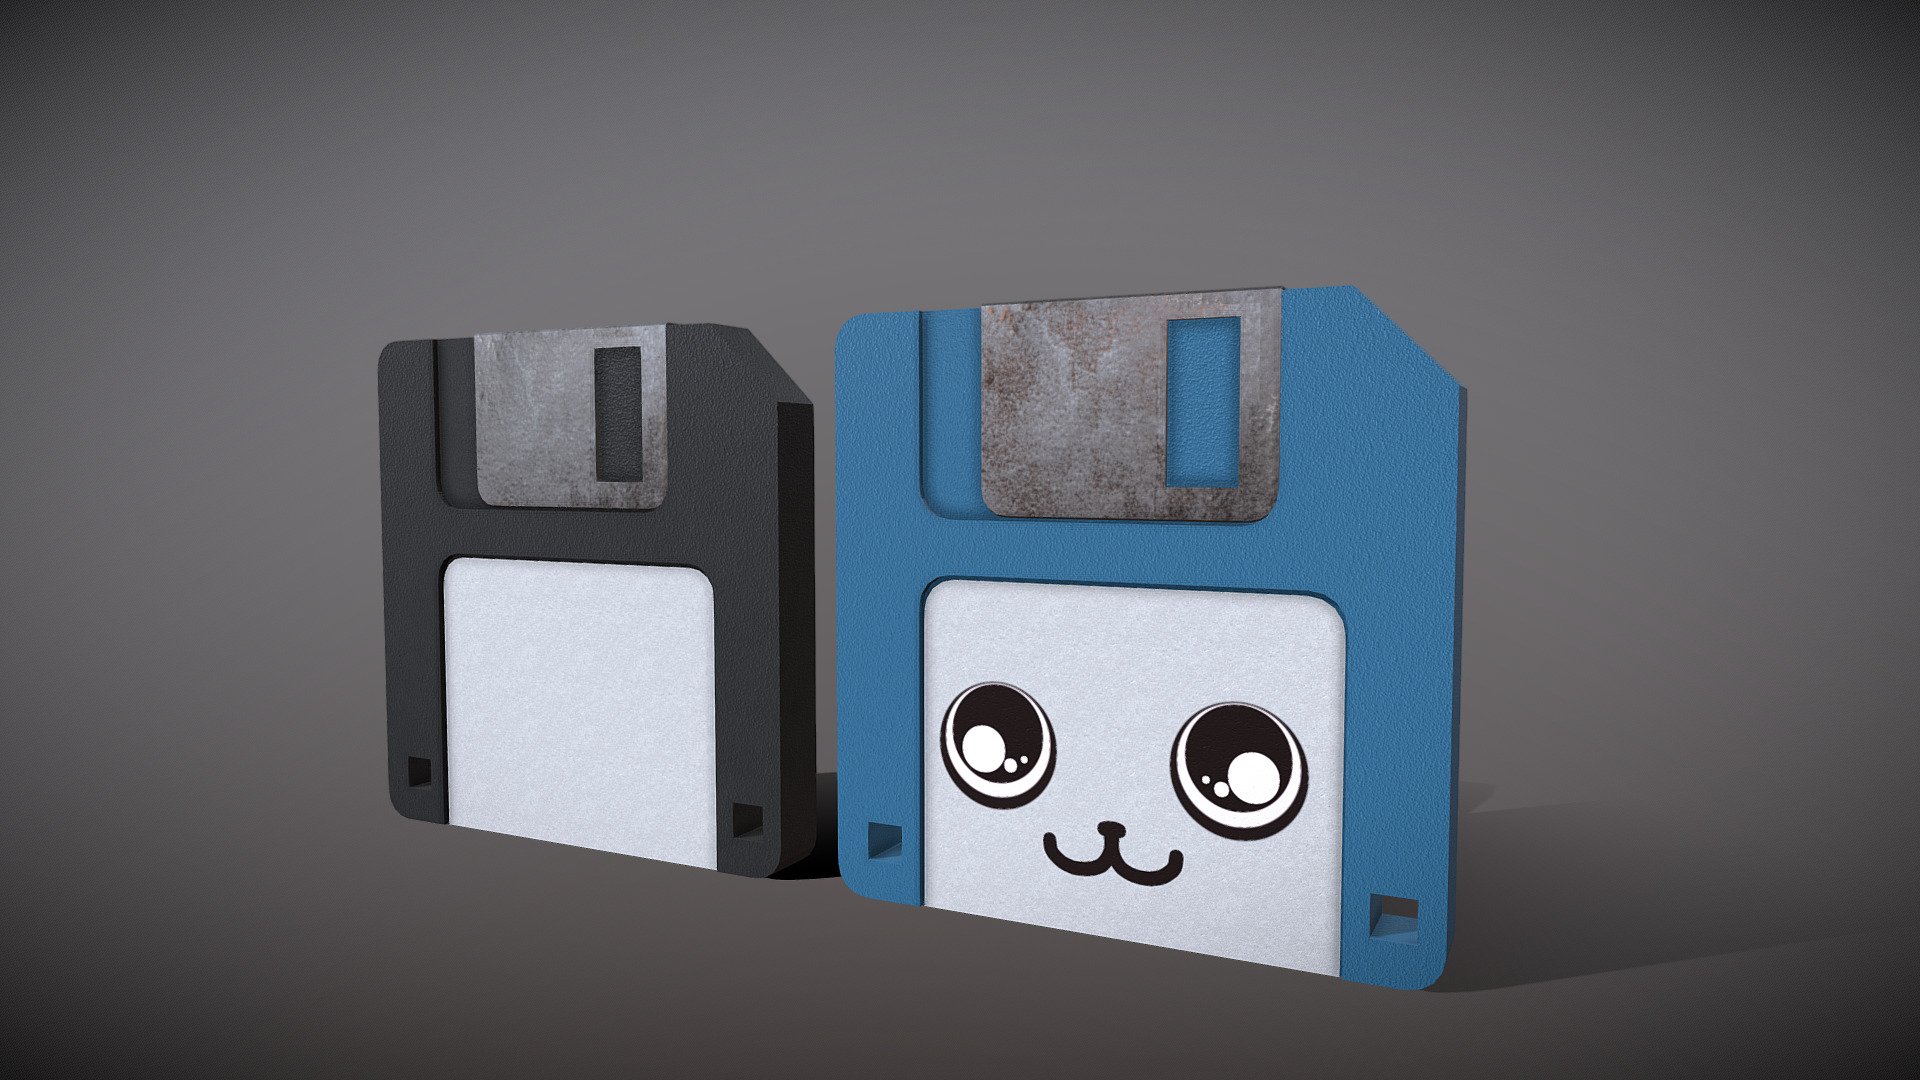 Stylized cartoon floppy disk with cute kawaii cartoon animal face on it. Second styzed disk textured in simple colors without face. 


Model comes with 2k PNG PBR textures of Color, Roughness, Metallic and Normal Map. 


Model made for #SketchfabWeeklyChallenge - Cartoon toy floppy disk stylized lowpoly - Buy Royalty Free 3D model by Scritta 3d model